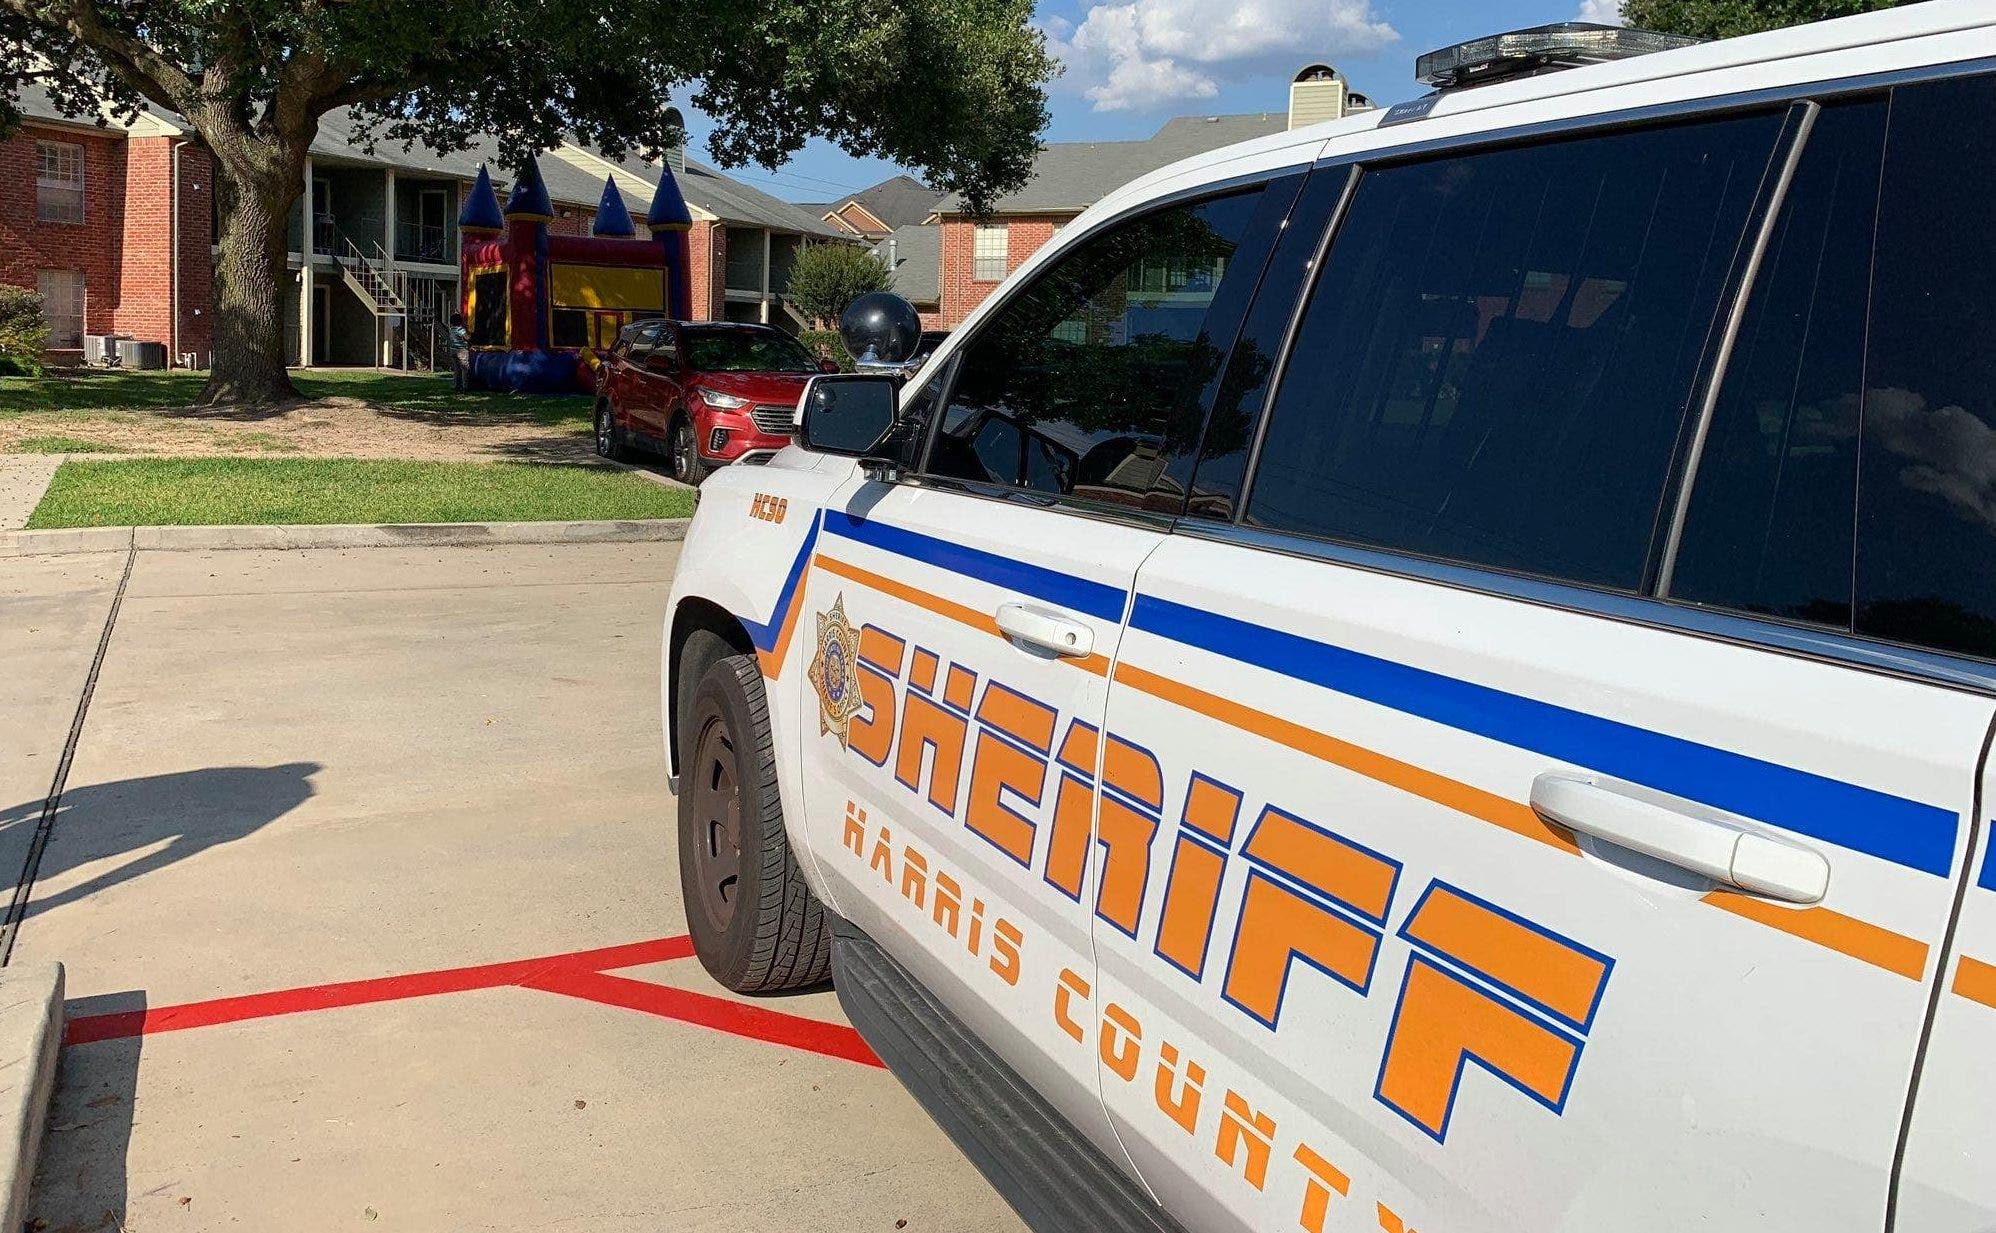 Texas girl, 3, shoots and kills 4-year-old sister after finding loaded gun in home